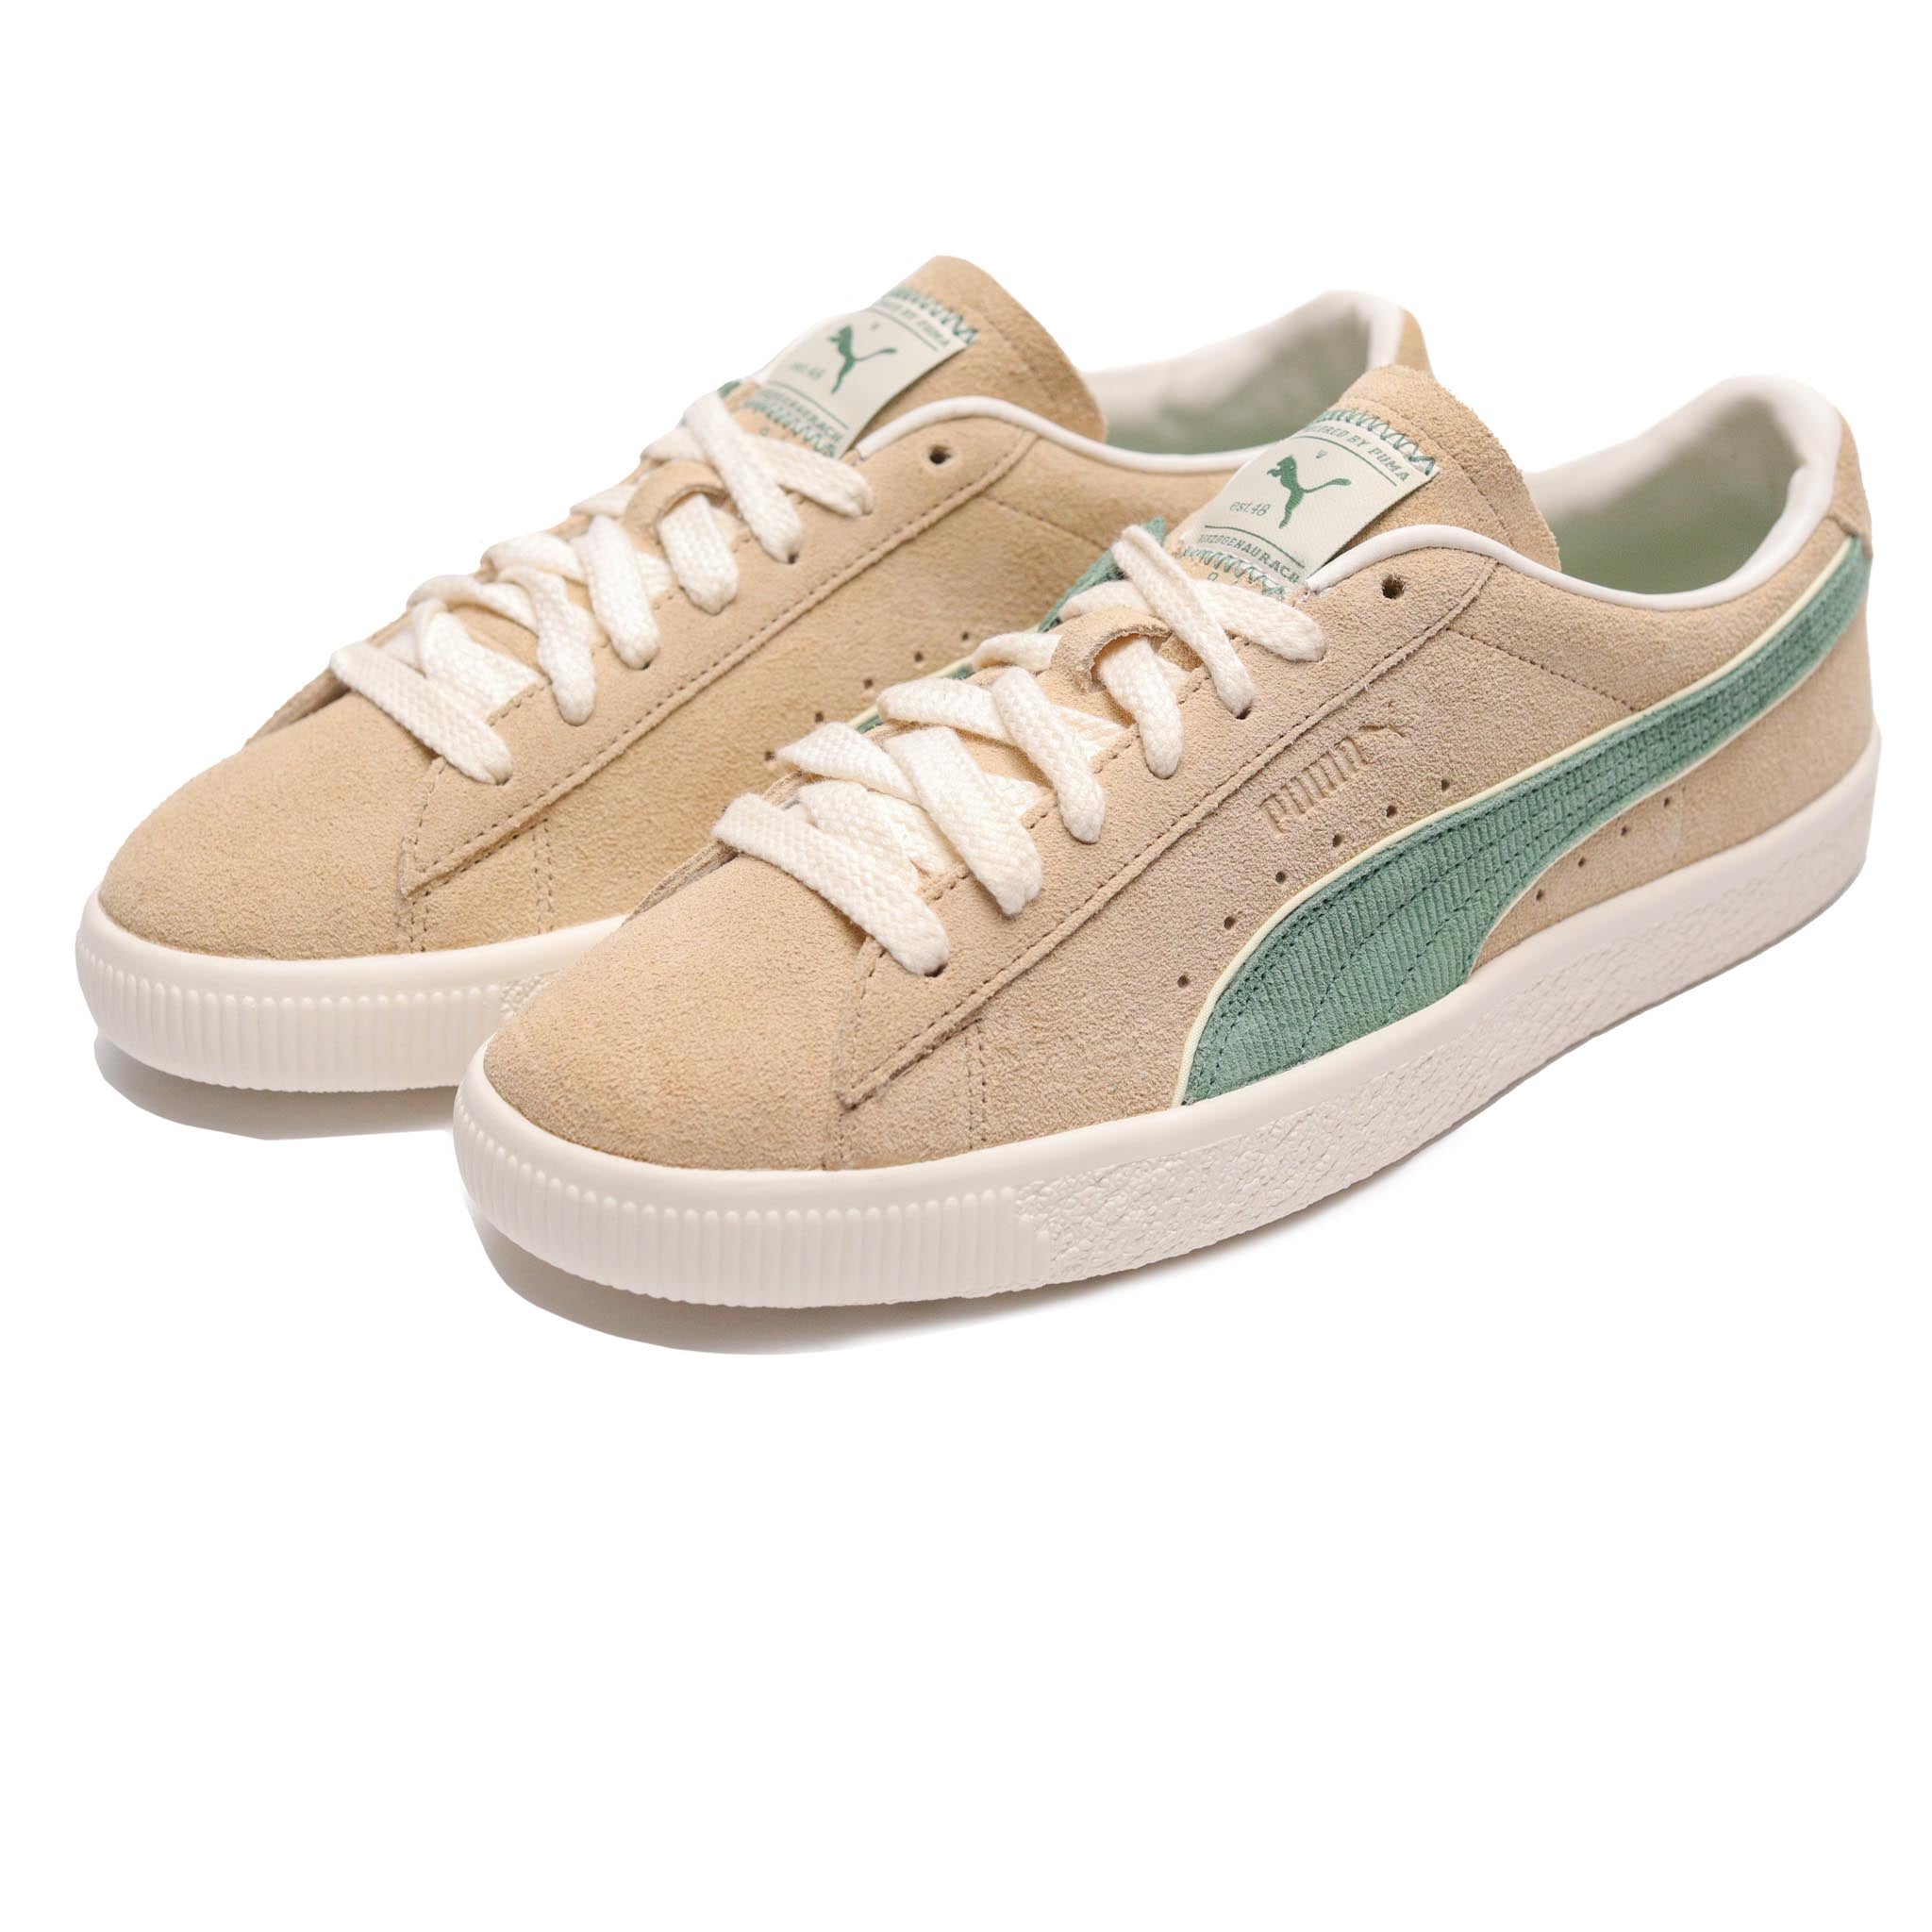 Puma Suede VTG Players Lounge Light Sand/Forest